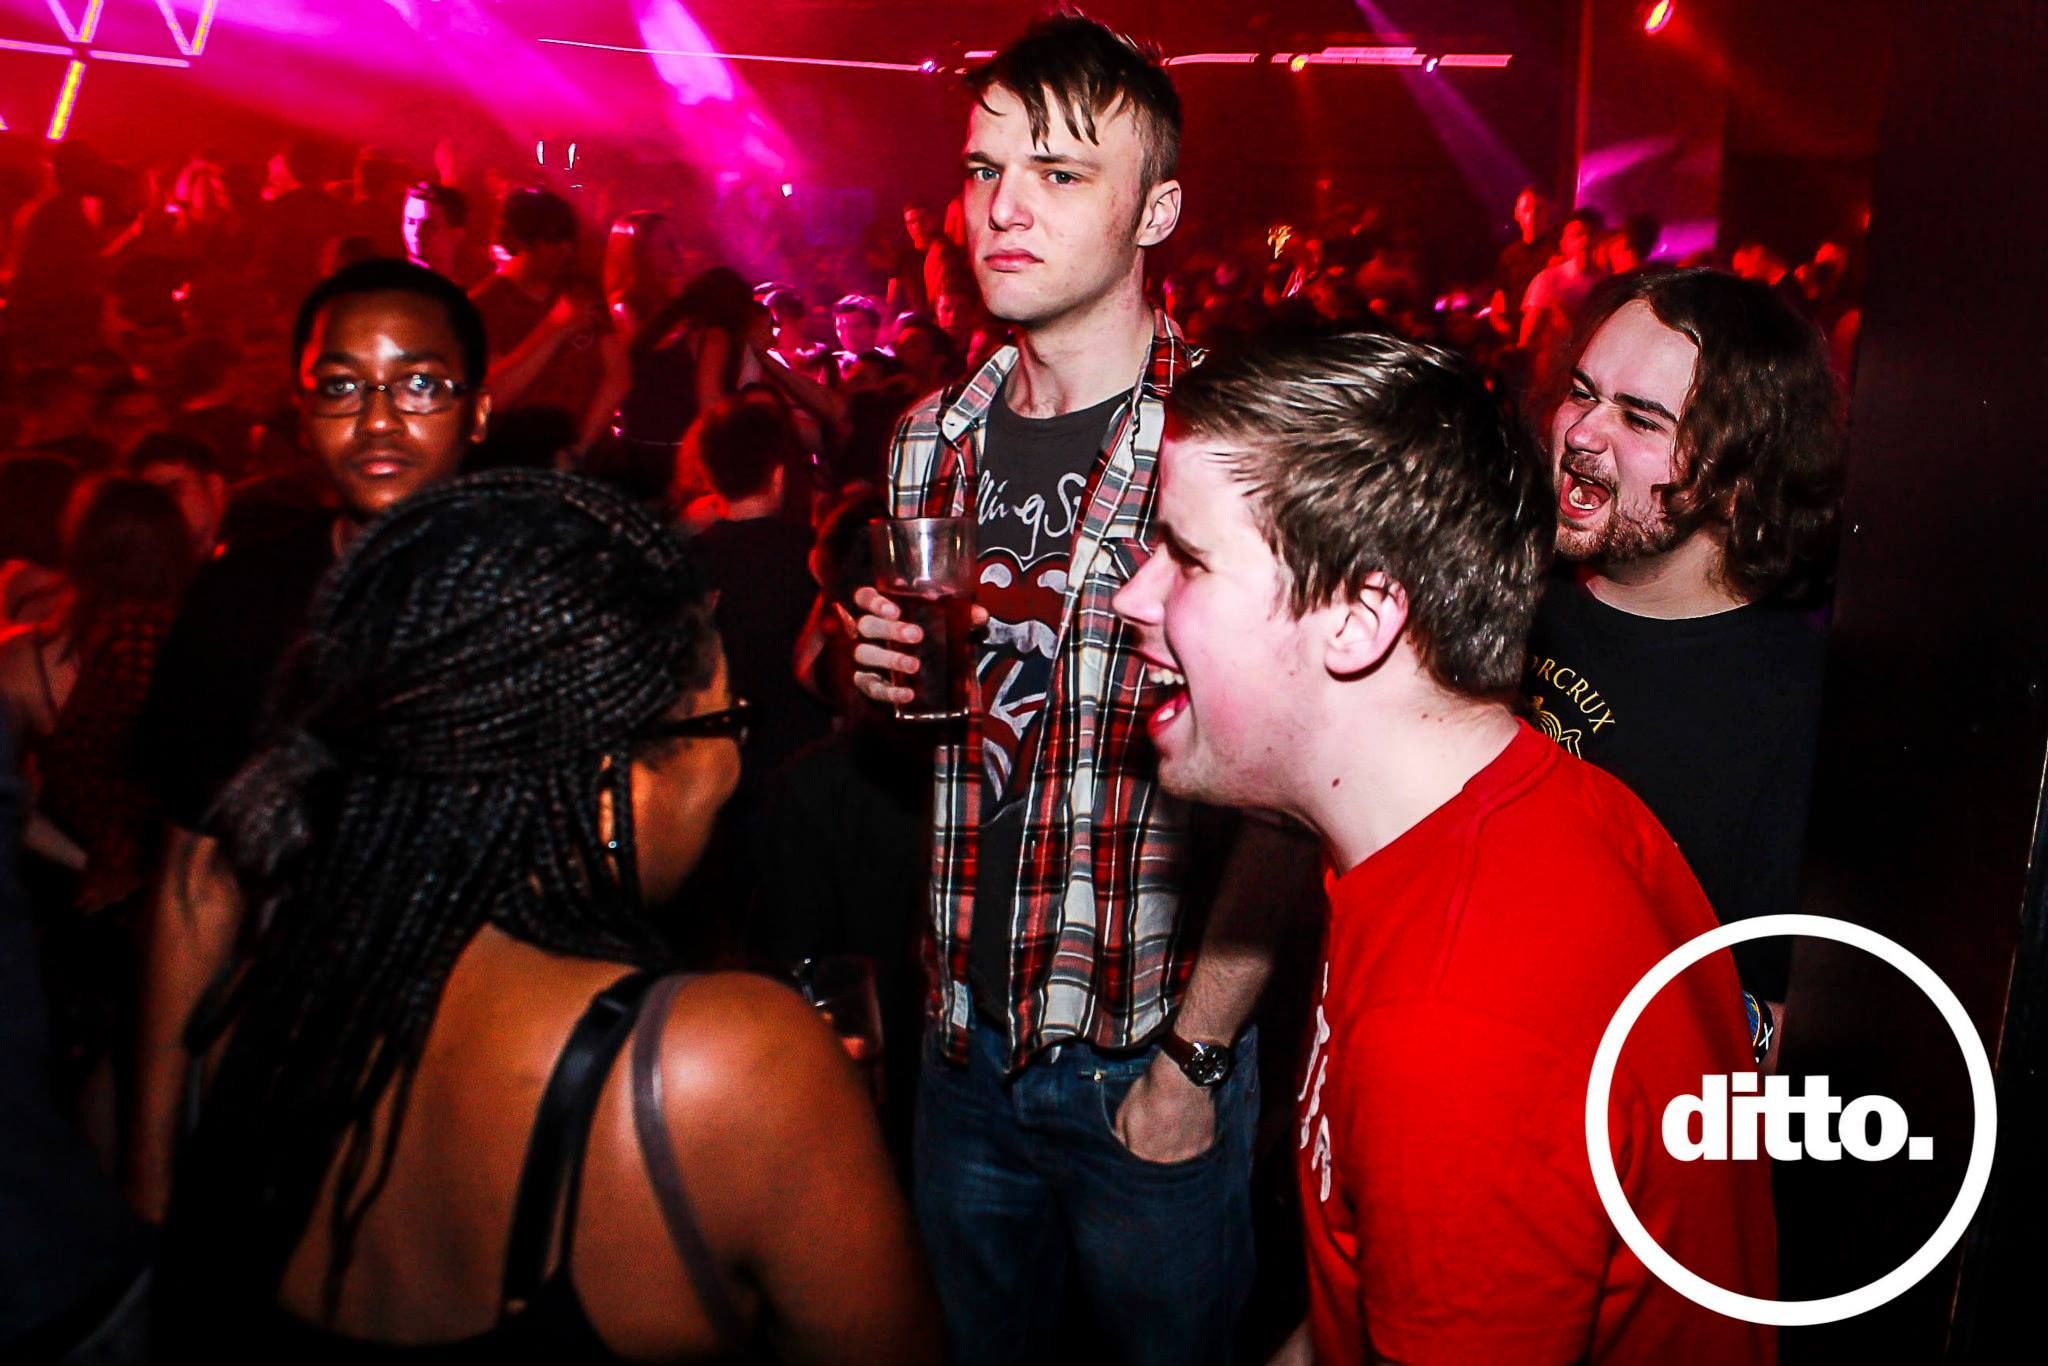 I've never had a club photo that's captured me quite so accurately.